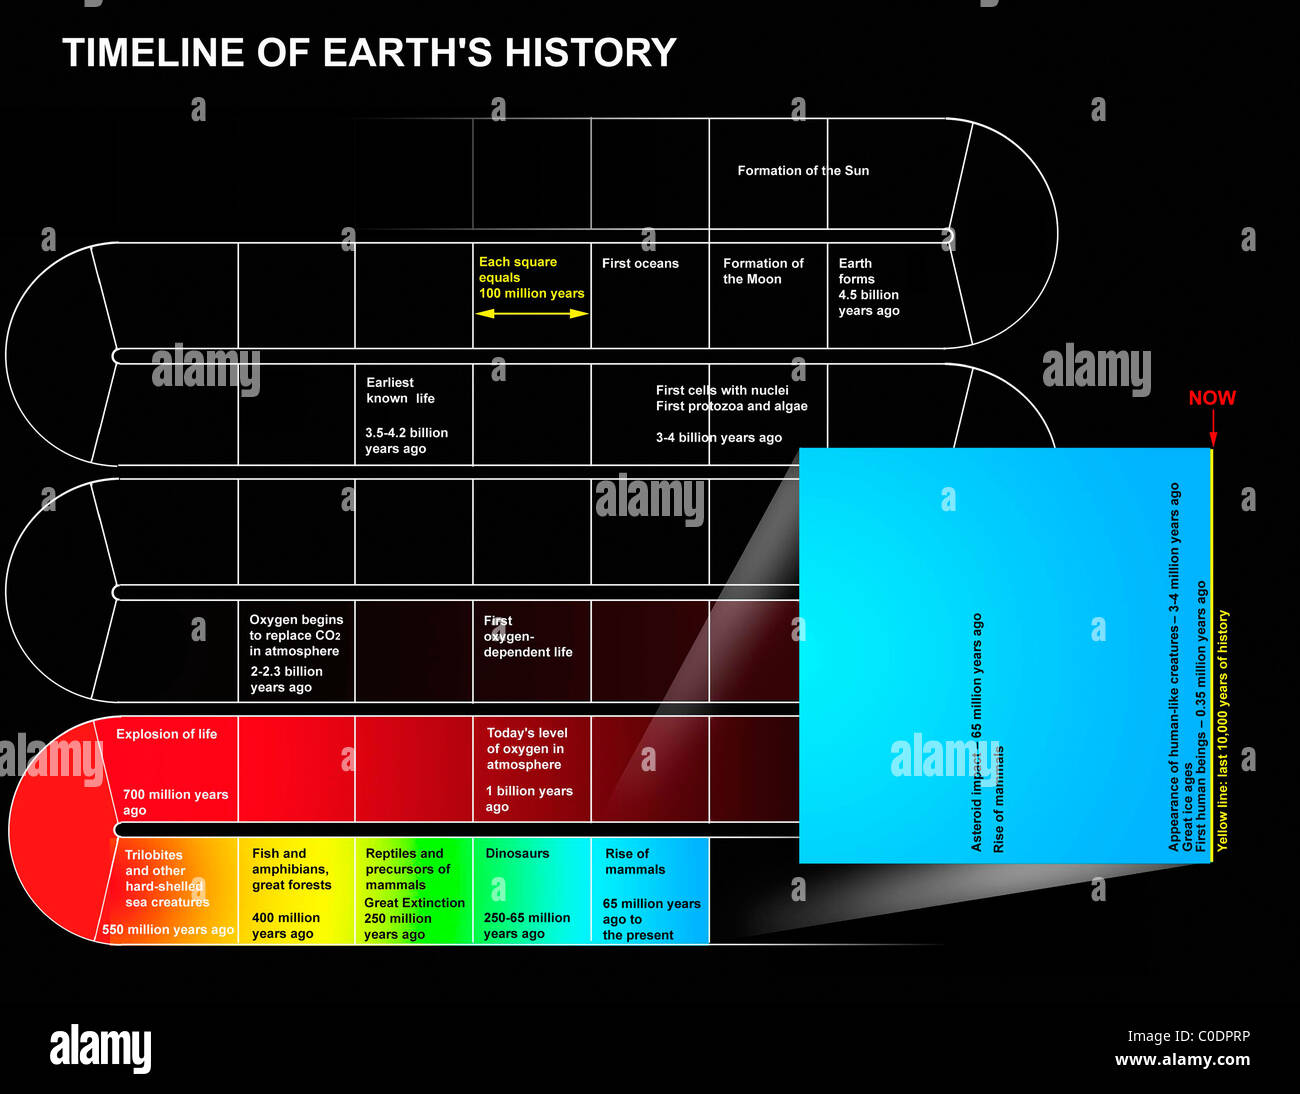 A timeline of Earth's history. Stock Photo